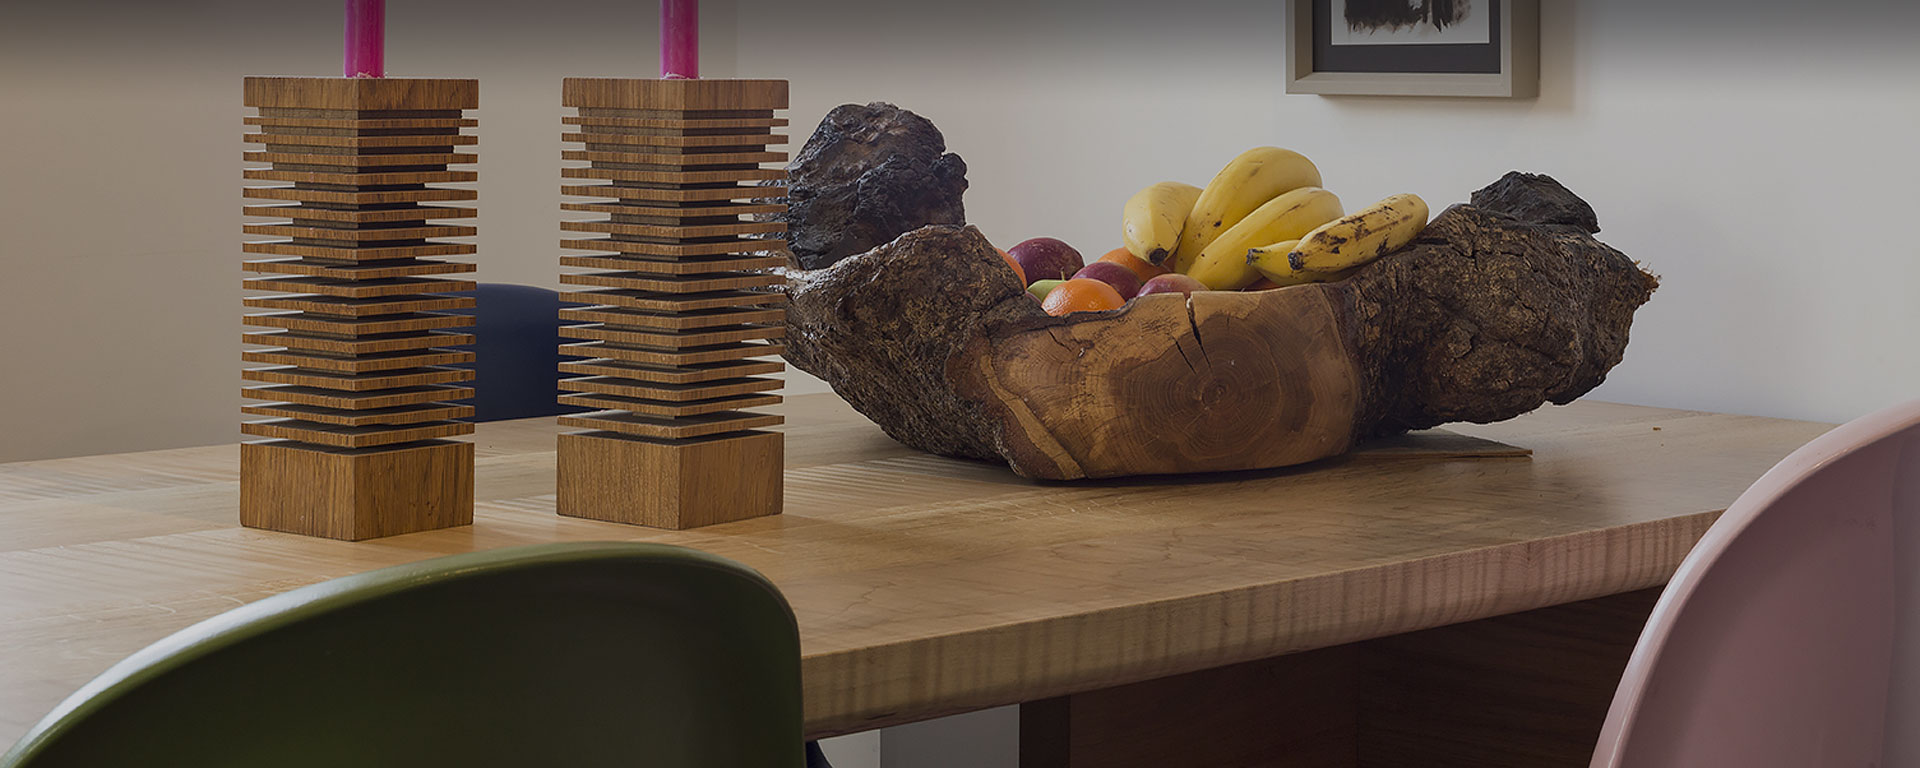 Bespoke Dining Room Table with Fruit Bowl, Brighton & Hove